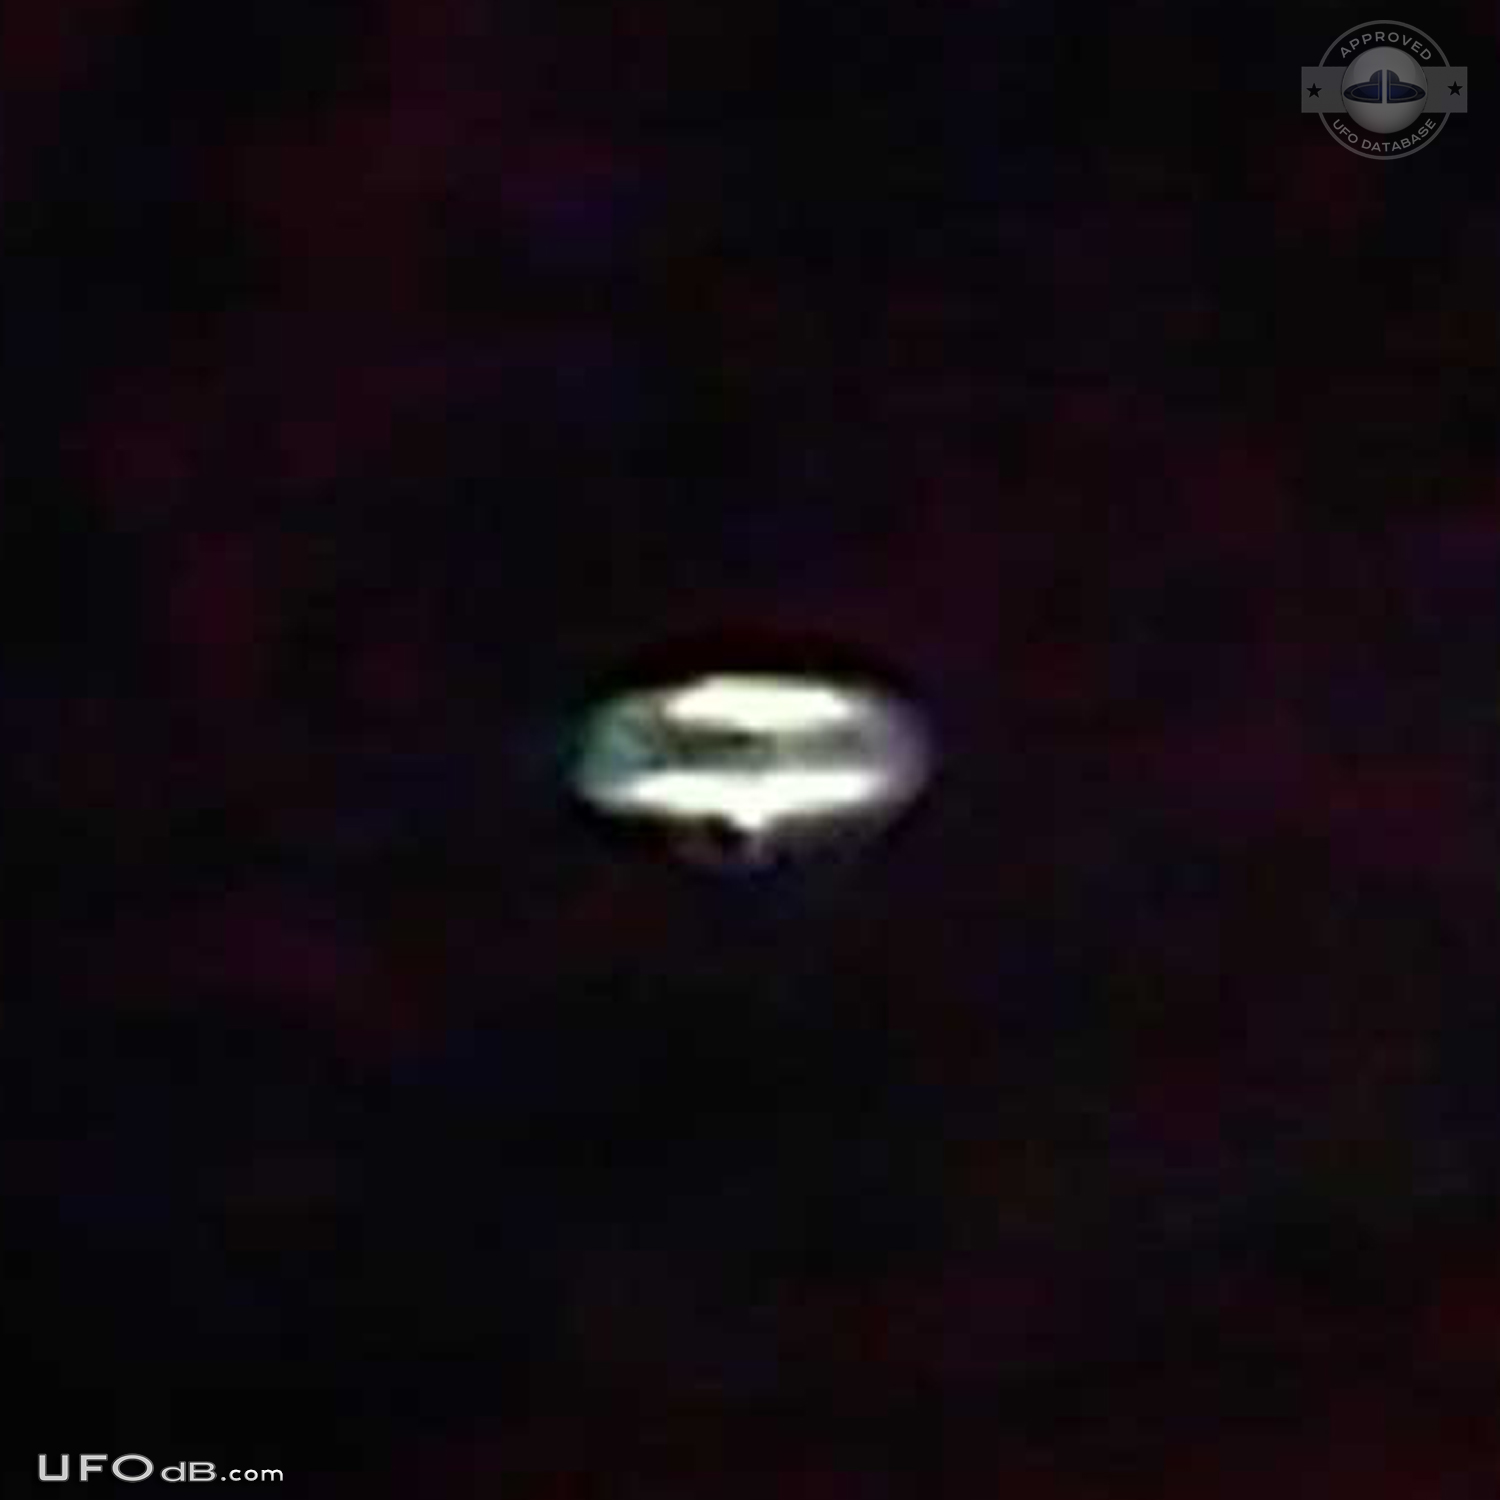 Man take picture of UFO he taught it was a blimp - Los Angeles 2011 UFO Picture #389-3